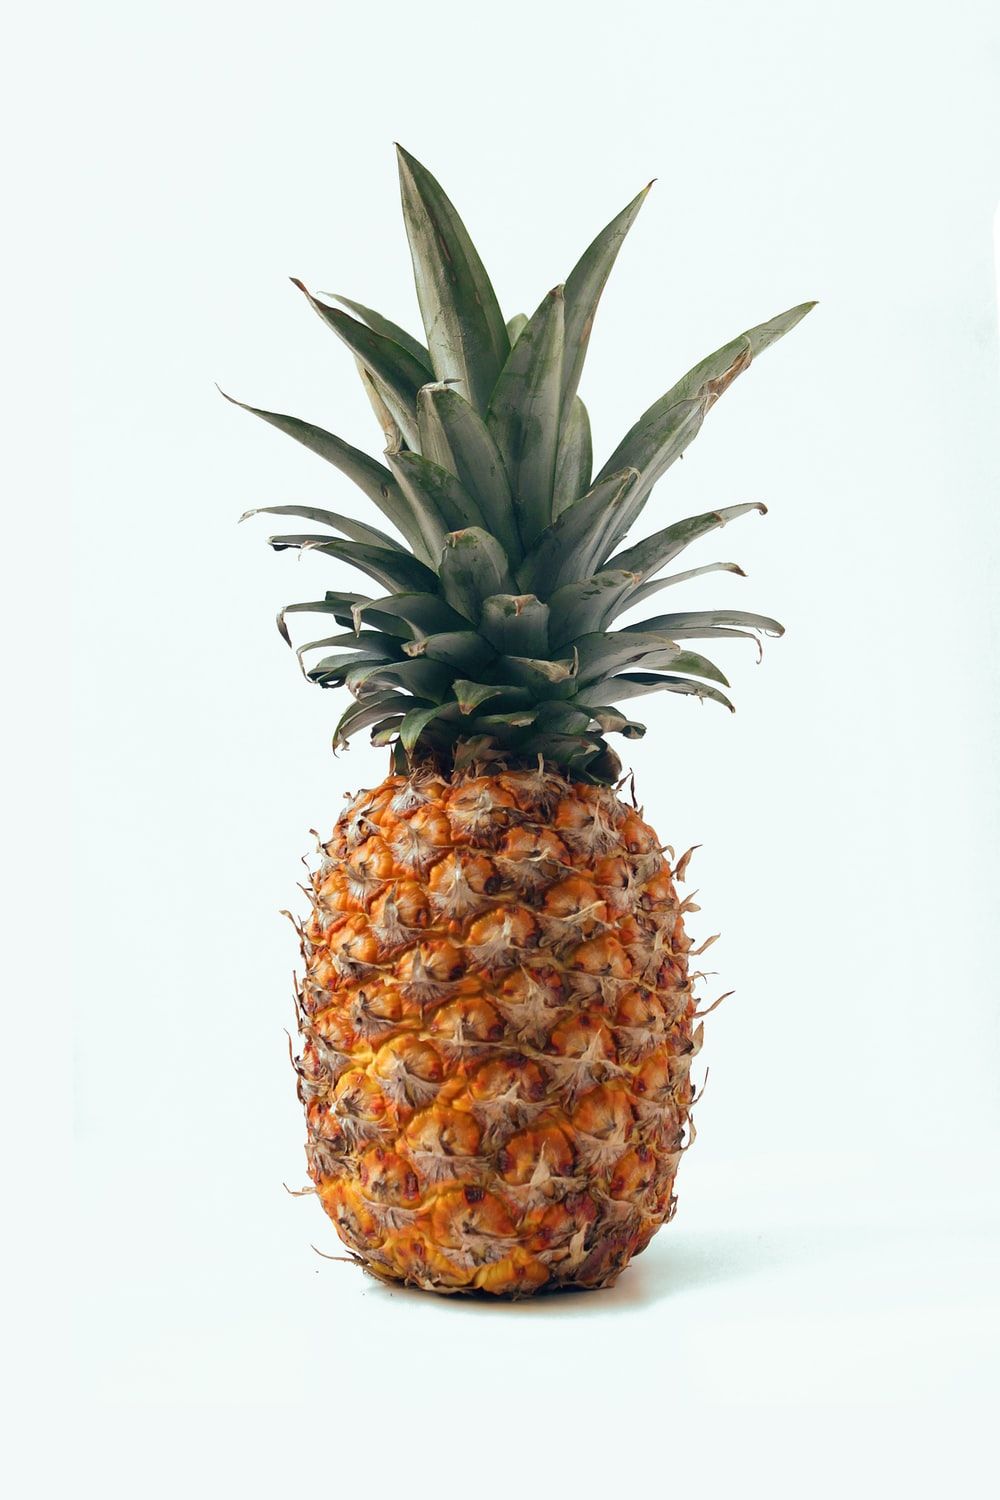 Pineapple Background Image: Download HD Background